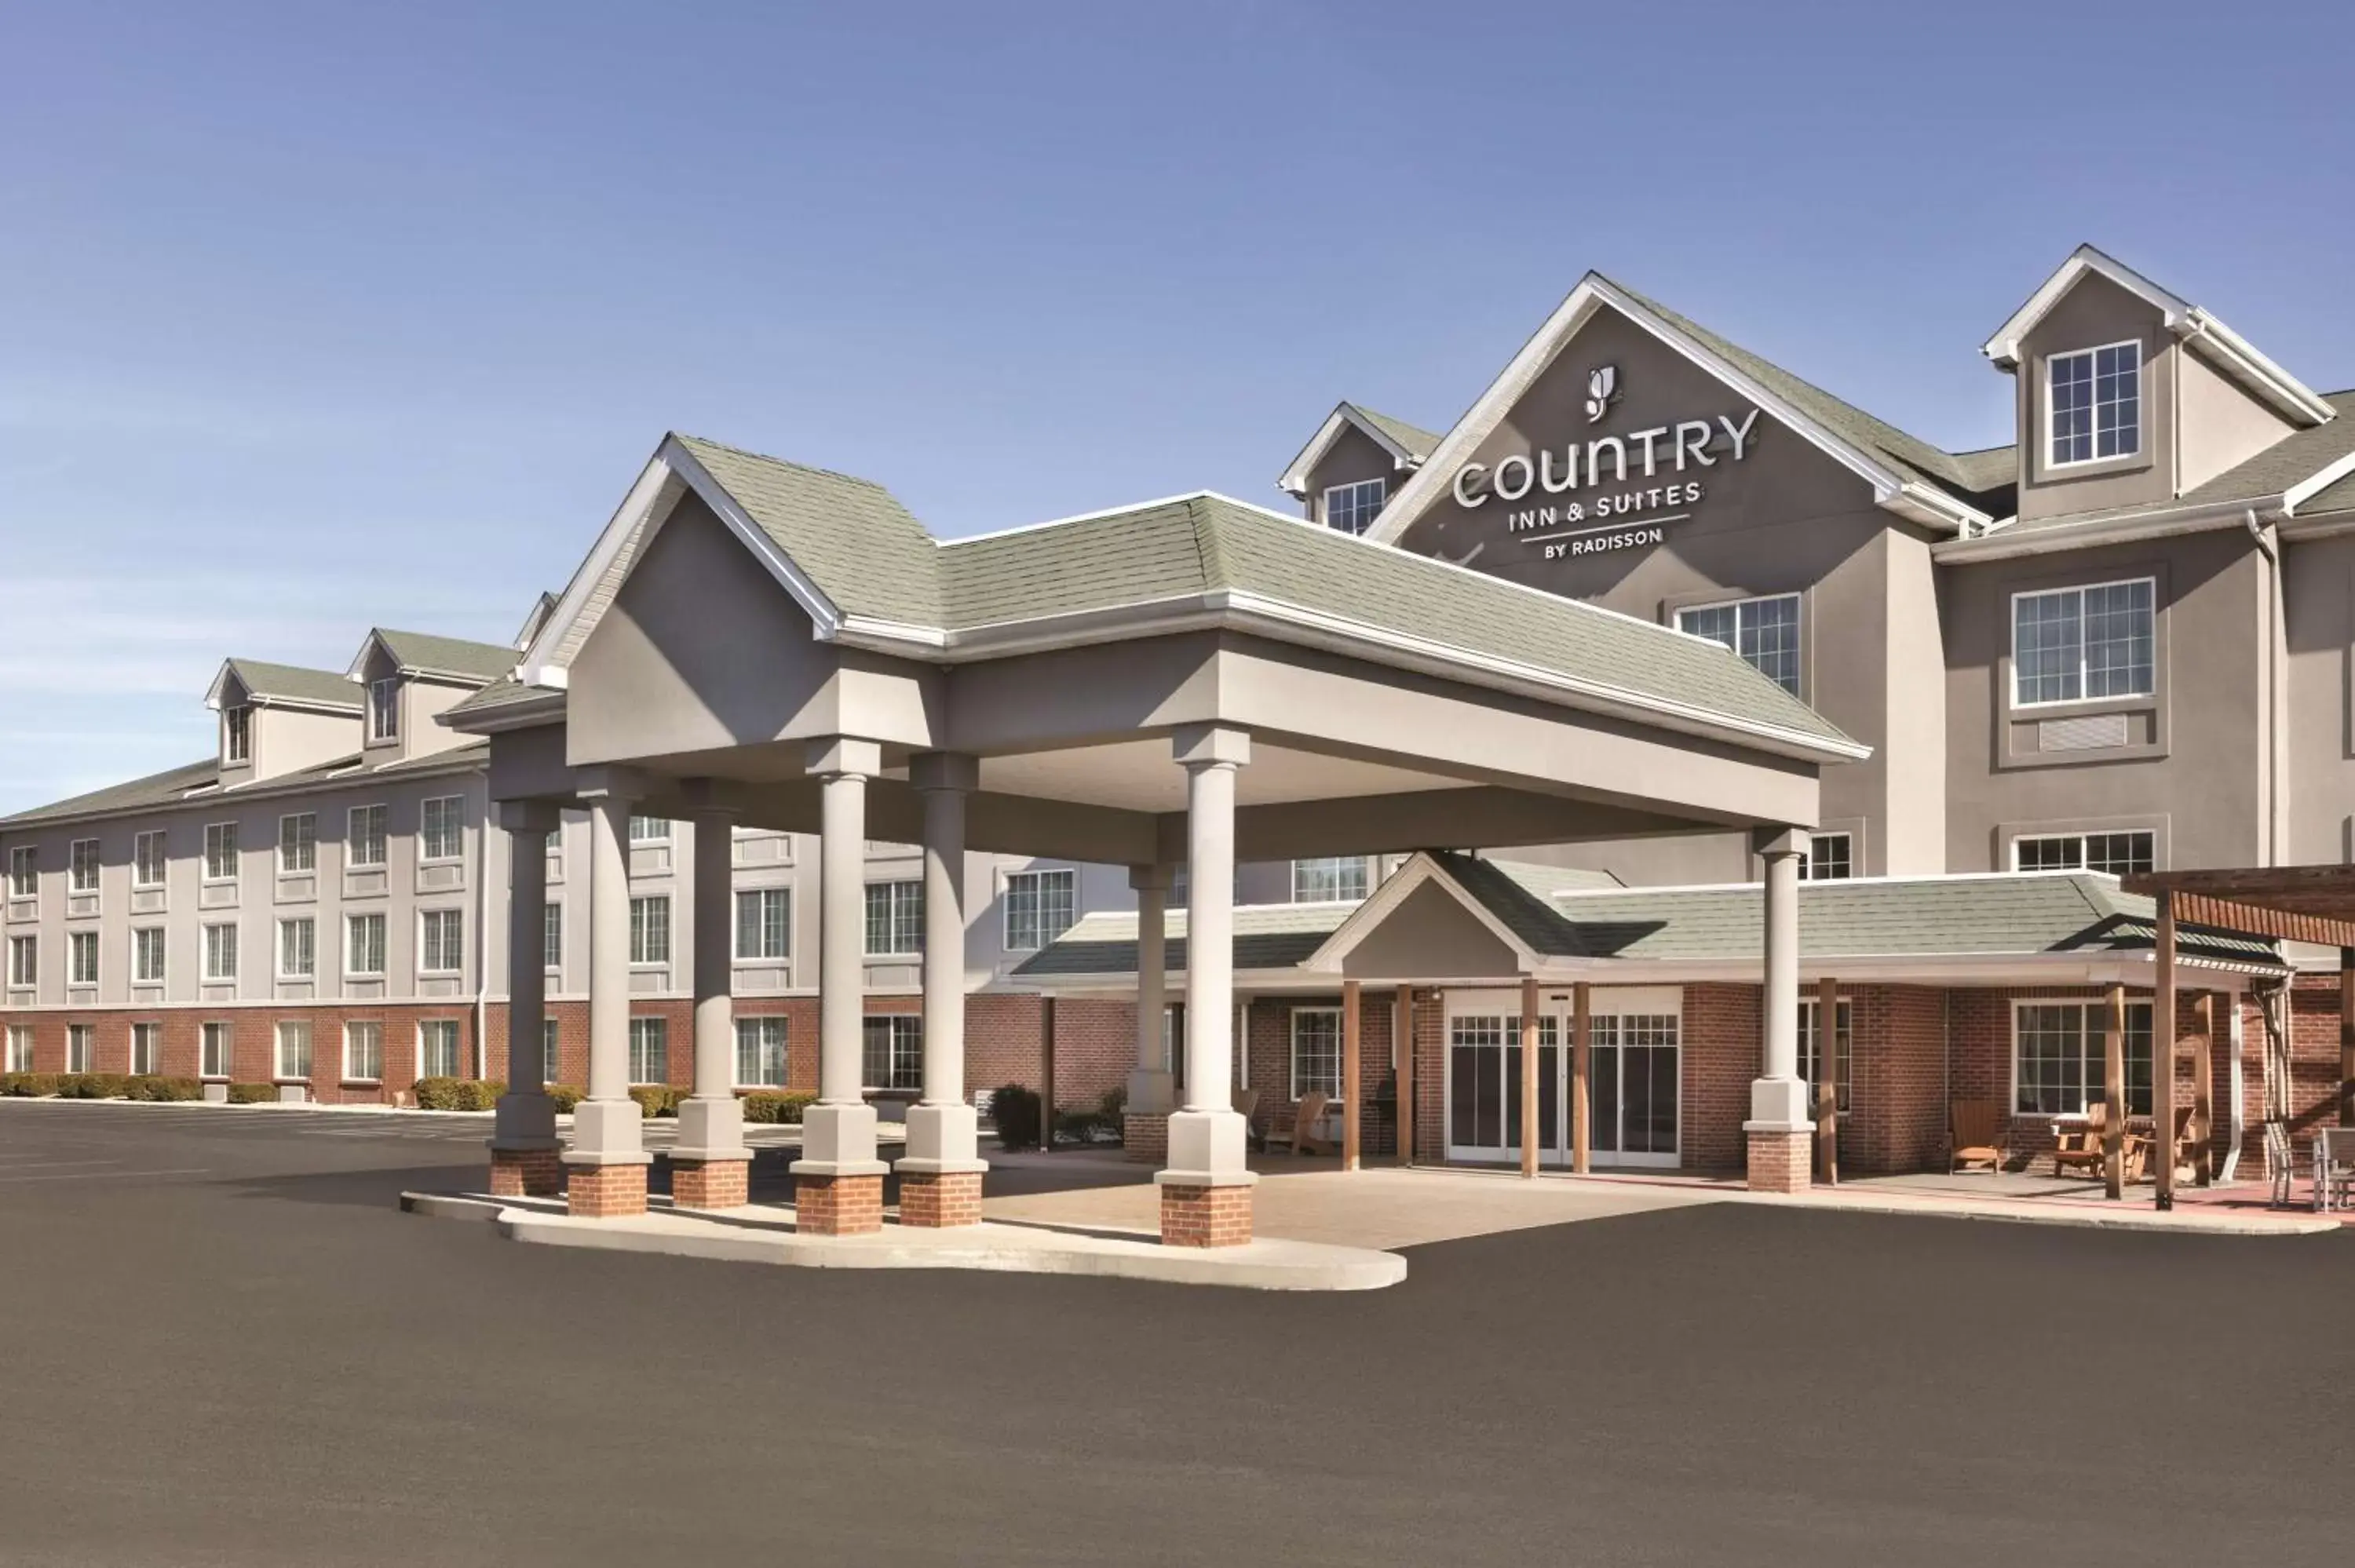 Property building in Country Inn & Suites by Radisson London, Kentucky